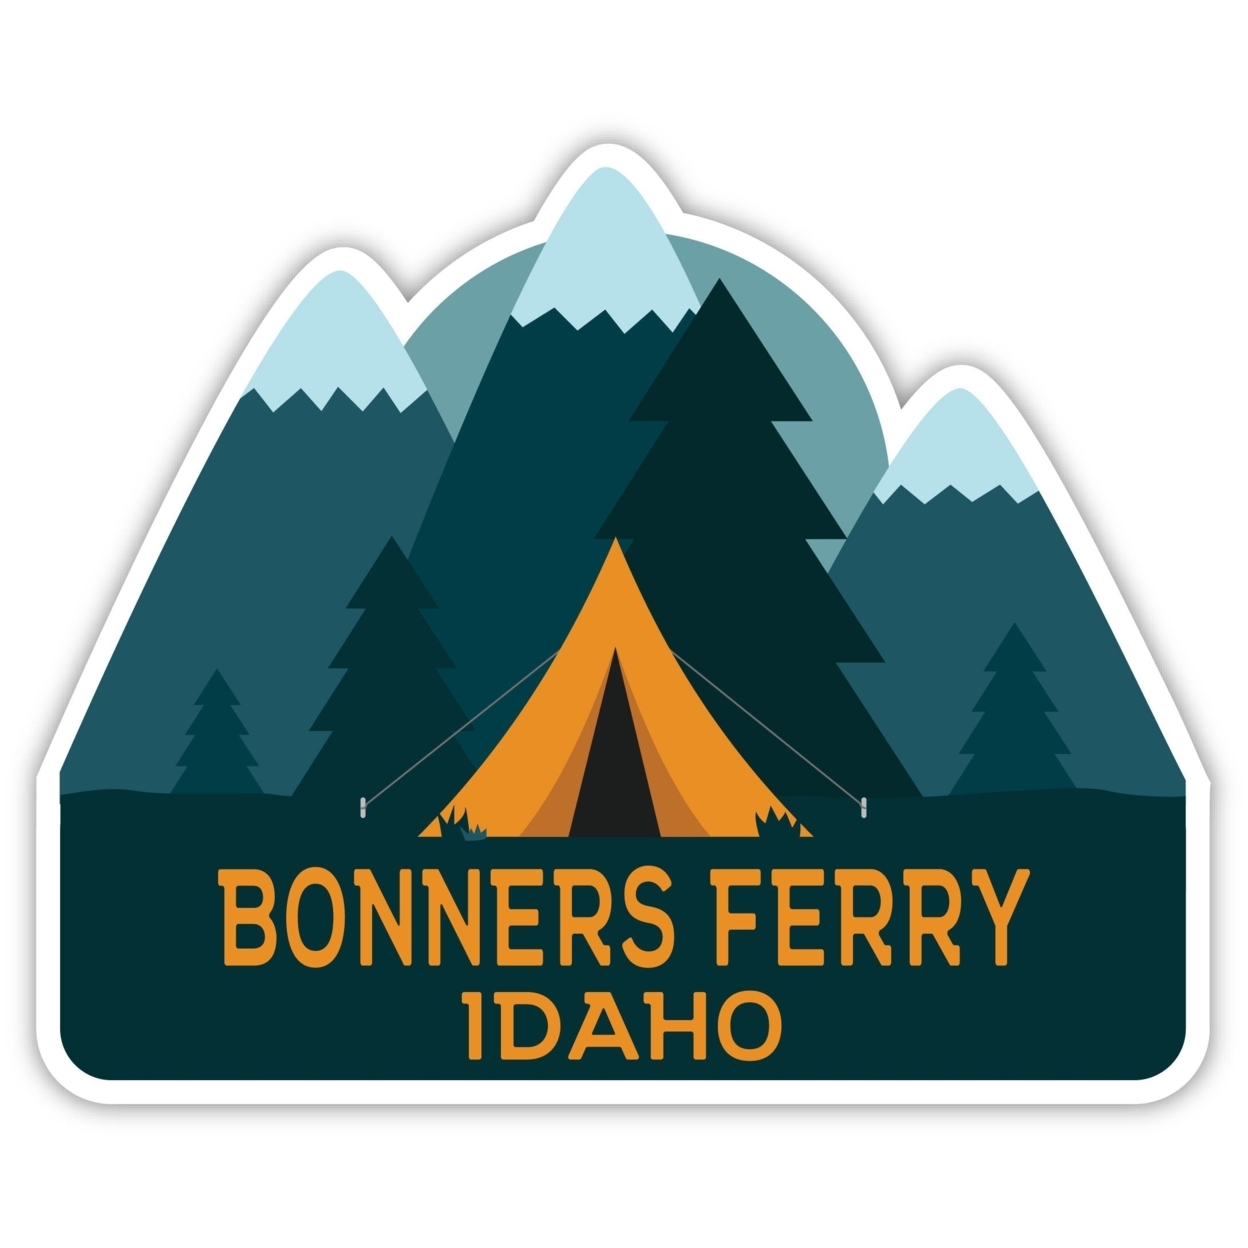 Bonners Ferry Idaho Souvenir Decorative Stickers (Choose Theme And Size) - 4-Pack, 6-Inch, Adventures Awaits